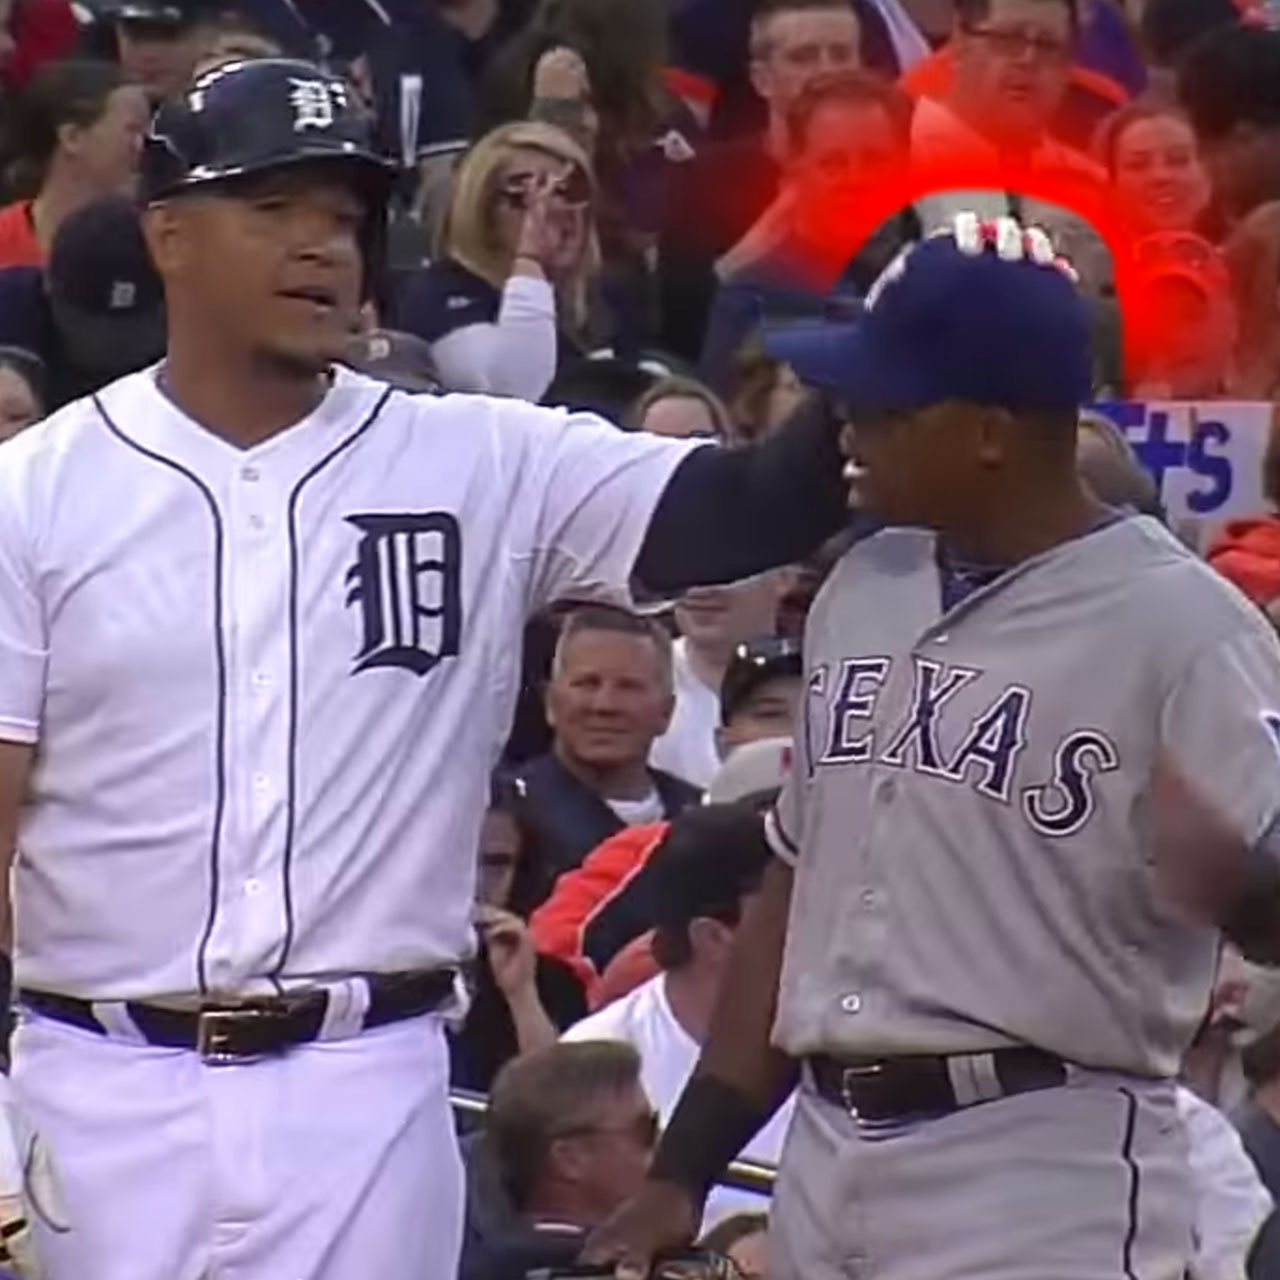 Adrian Beltre does not like having his head touched